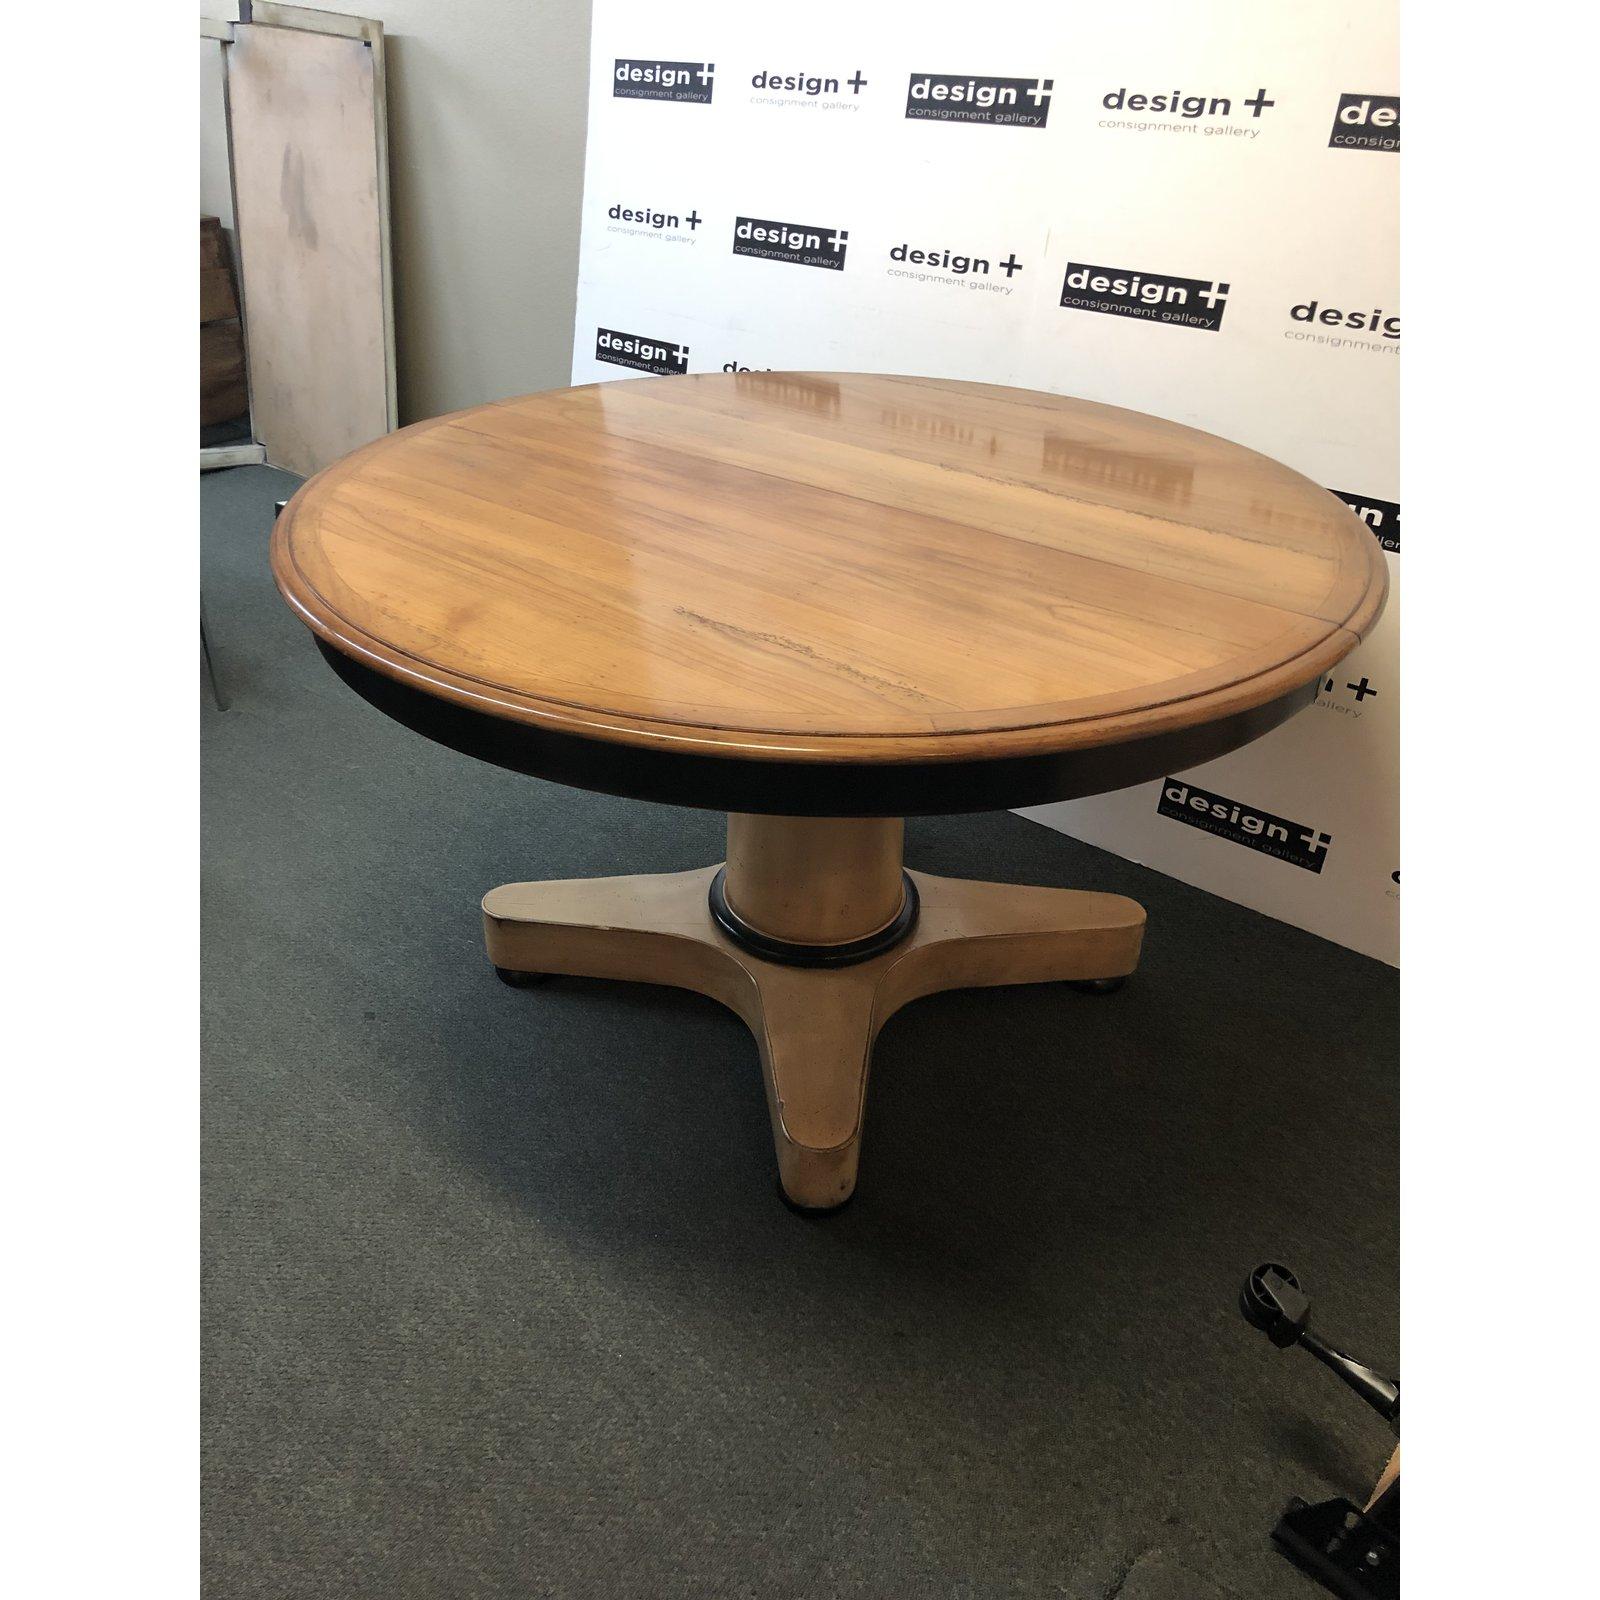 a contemporary dining table. A modern update on a Classic pedestal table, this piece is highlighted with varying stains. A natural stain allows the woodgrain to show through on the minimally beveled top surface, while a white wash with distressed